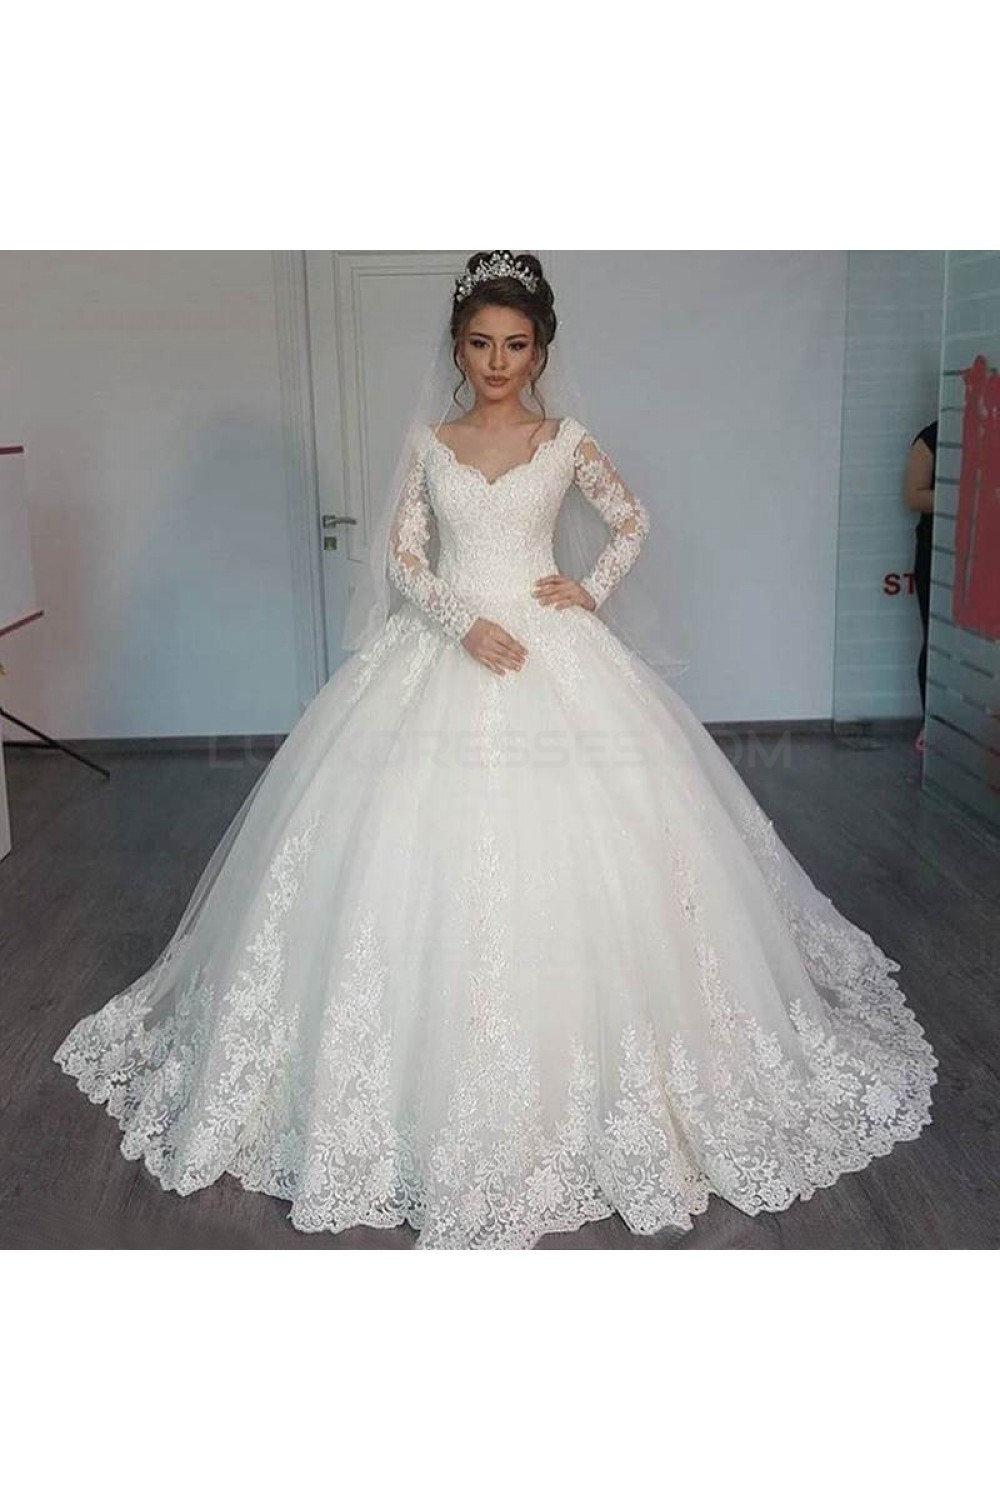 Lace Ball Gown Wedding Dresses
 Bridal Ball Gown V Neck Lace Long Sleeves Wedding Dresses